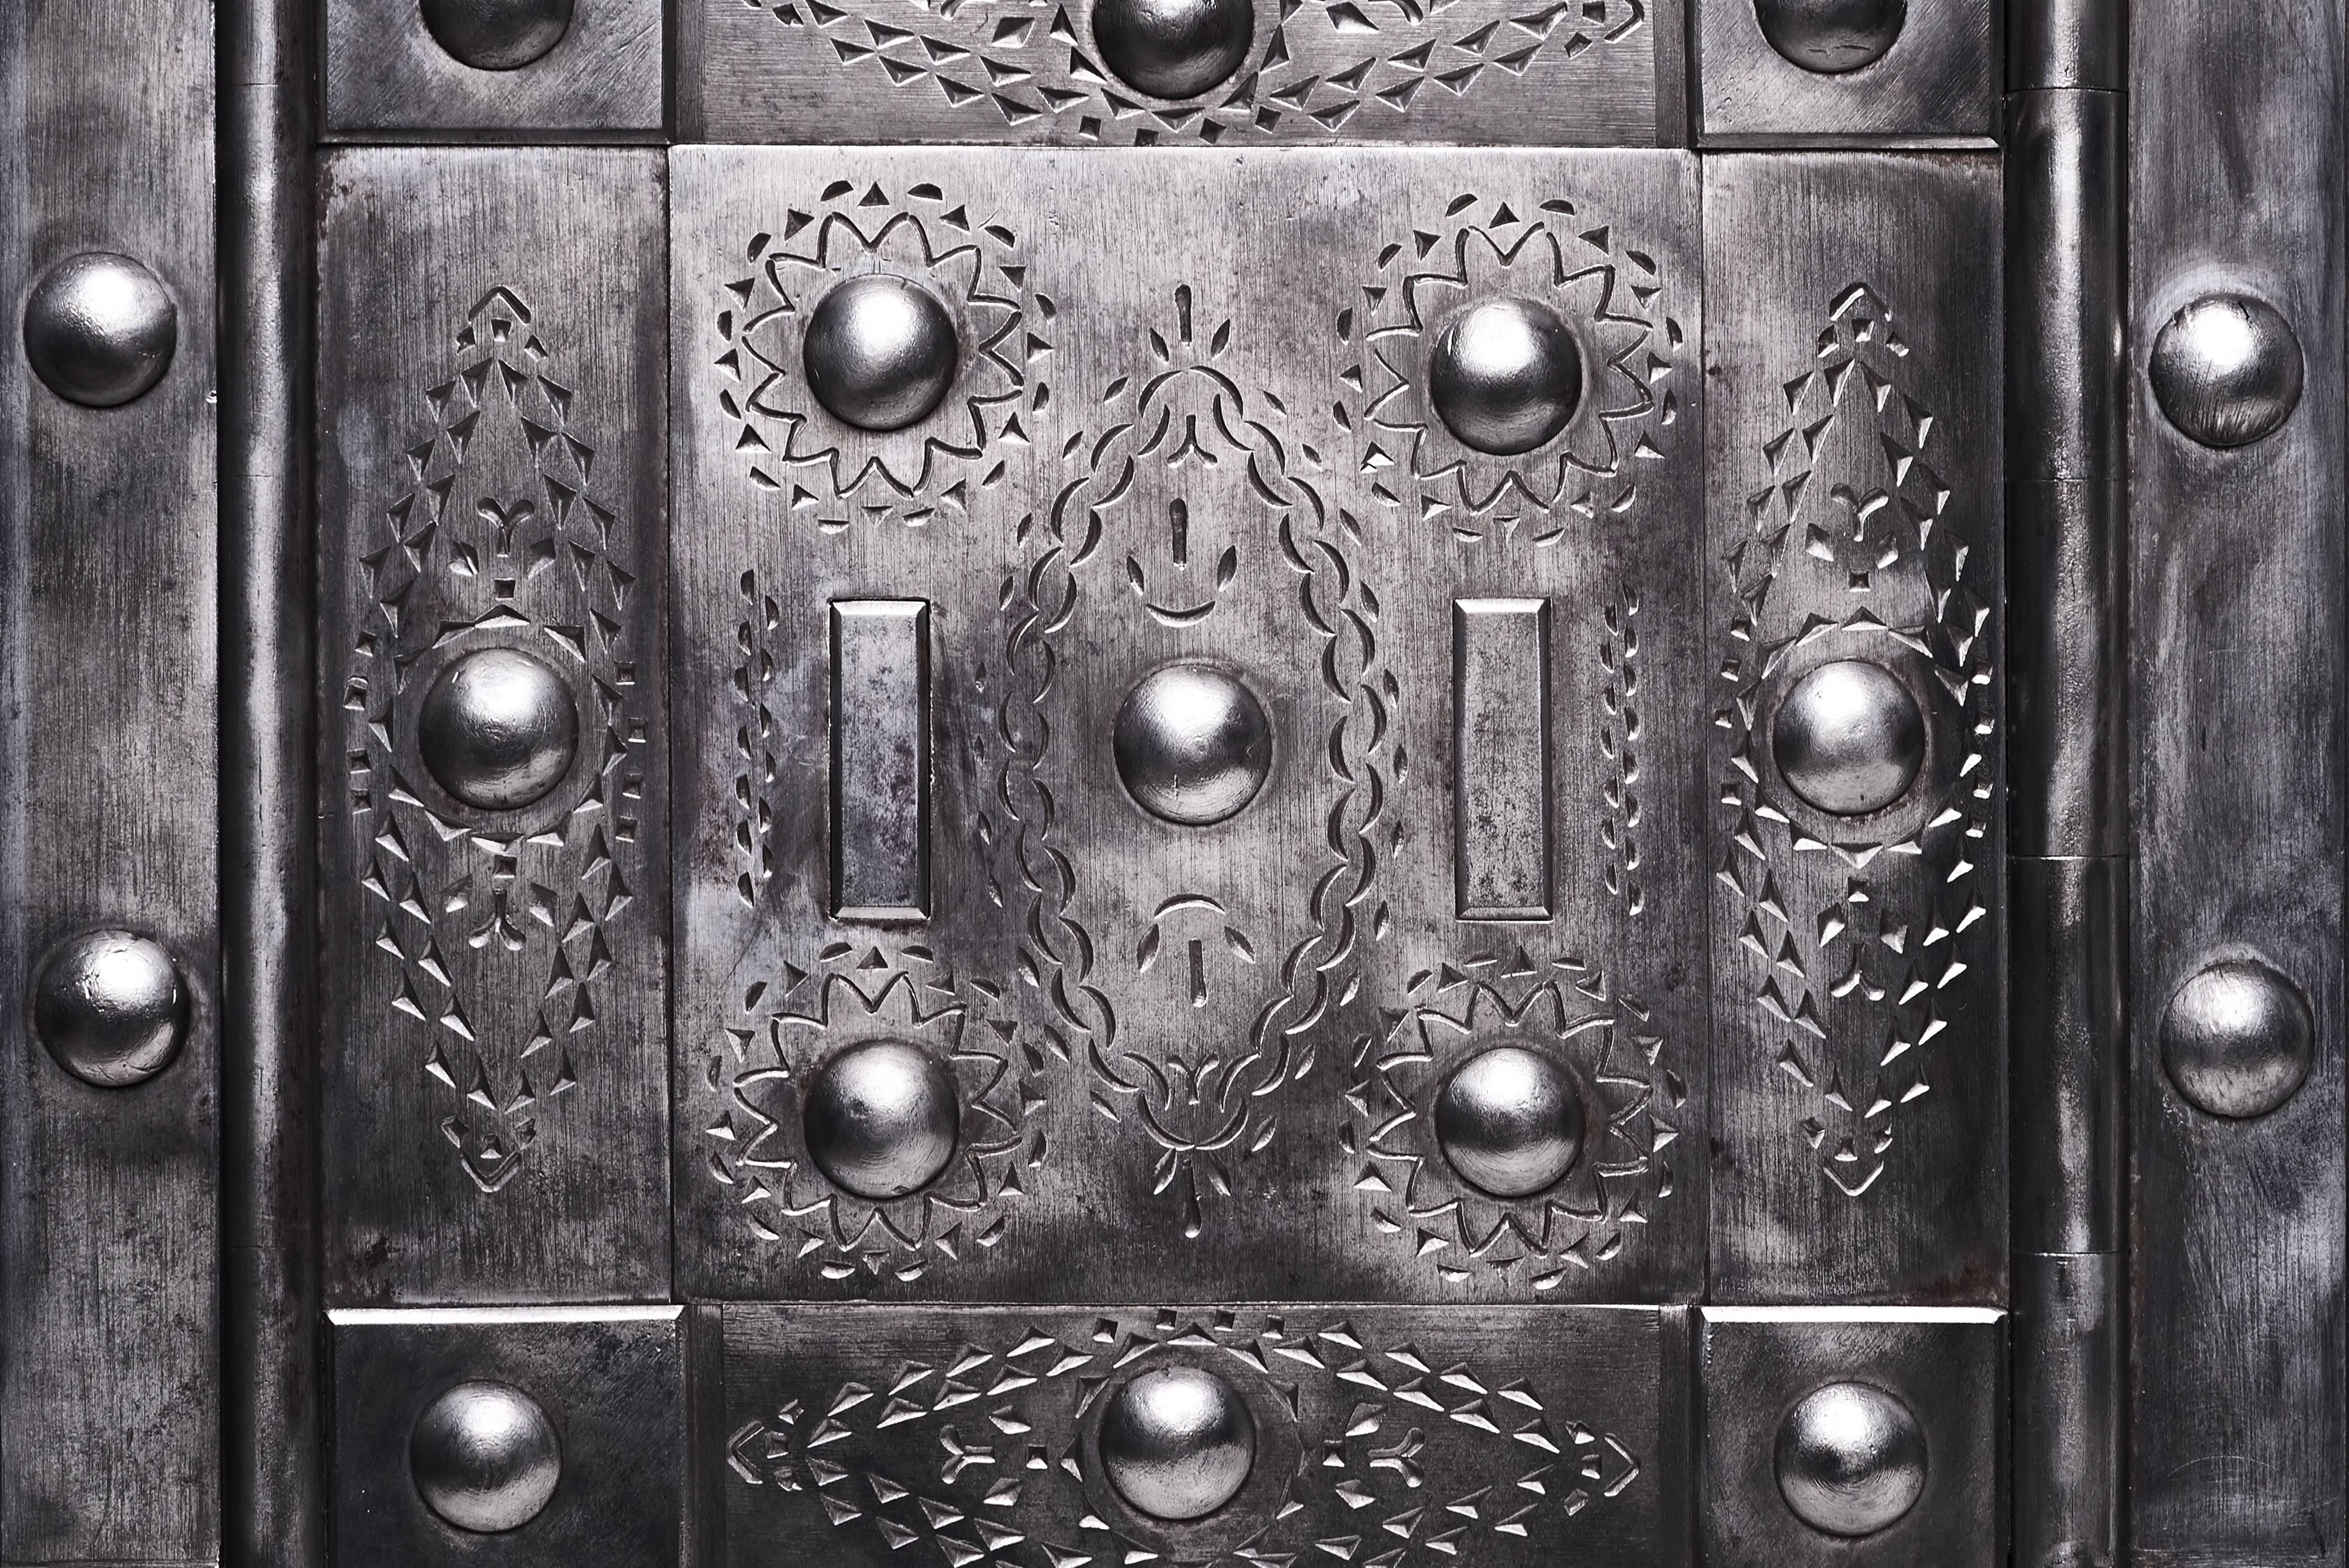 Small hobnail safe, desk top size, circa 1820-1840. This safe has an original and working key lock door, with a hidden release to expose the key hole and a secret sequence to follow with the key to activate the double locking mechanism to open the